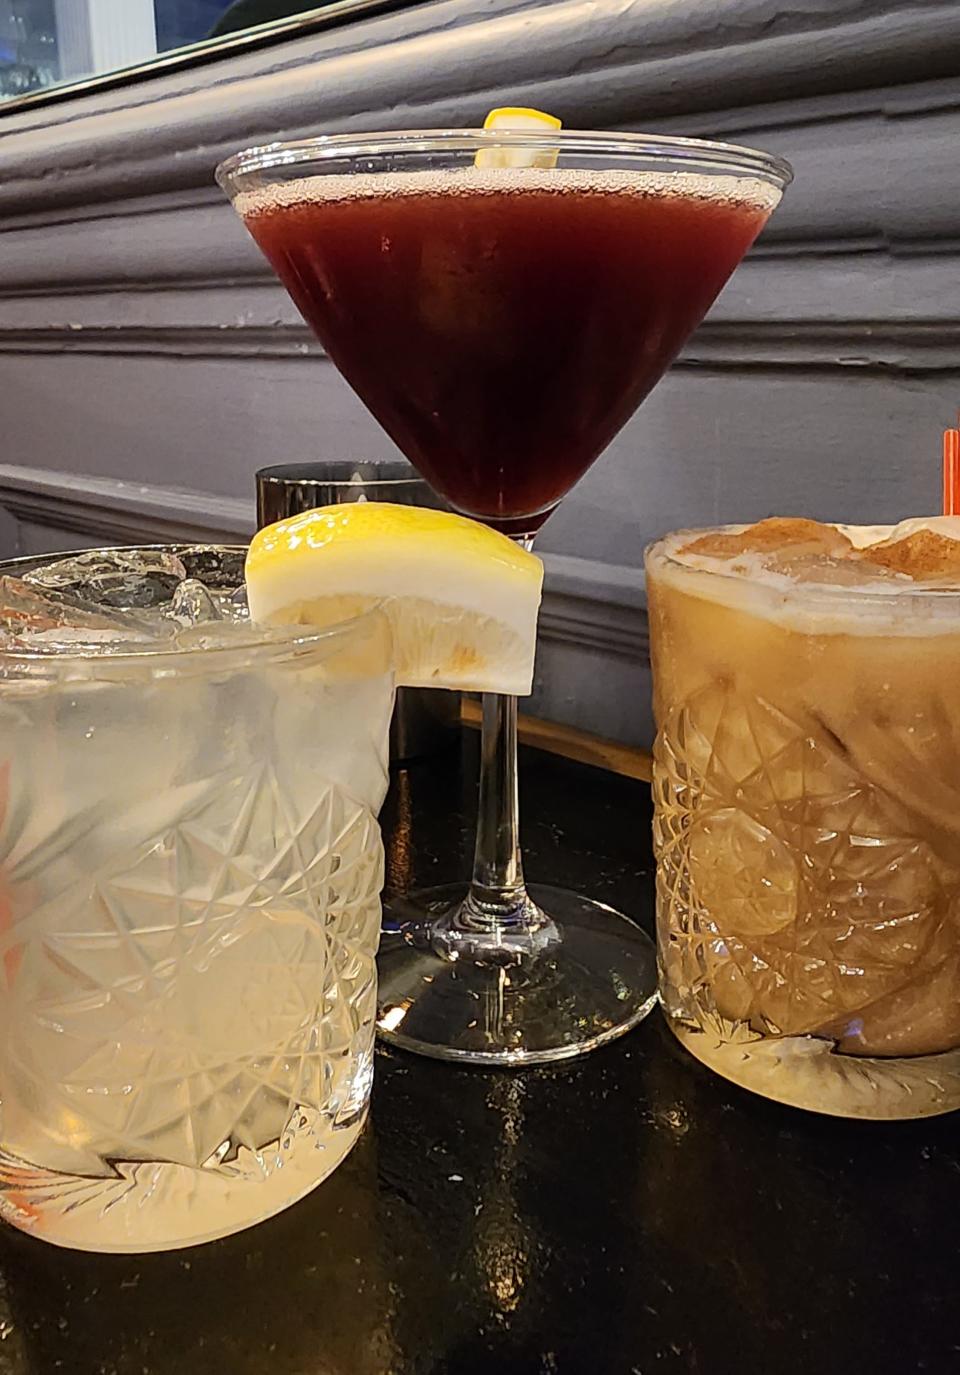 The lineup of brunch cocktails is impressive at The George.